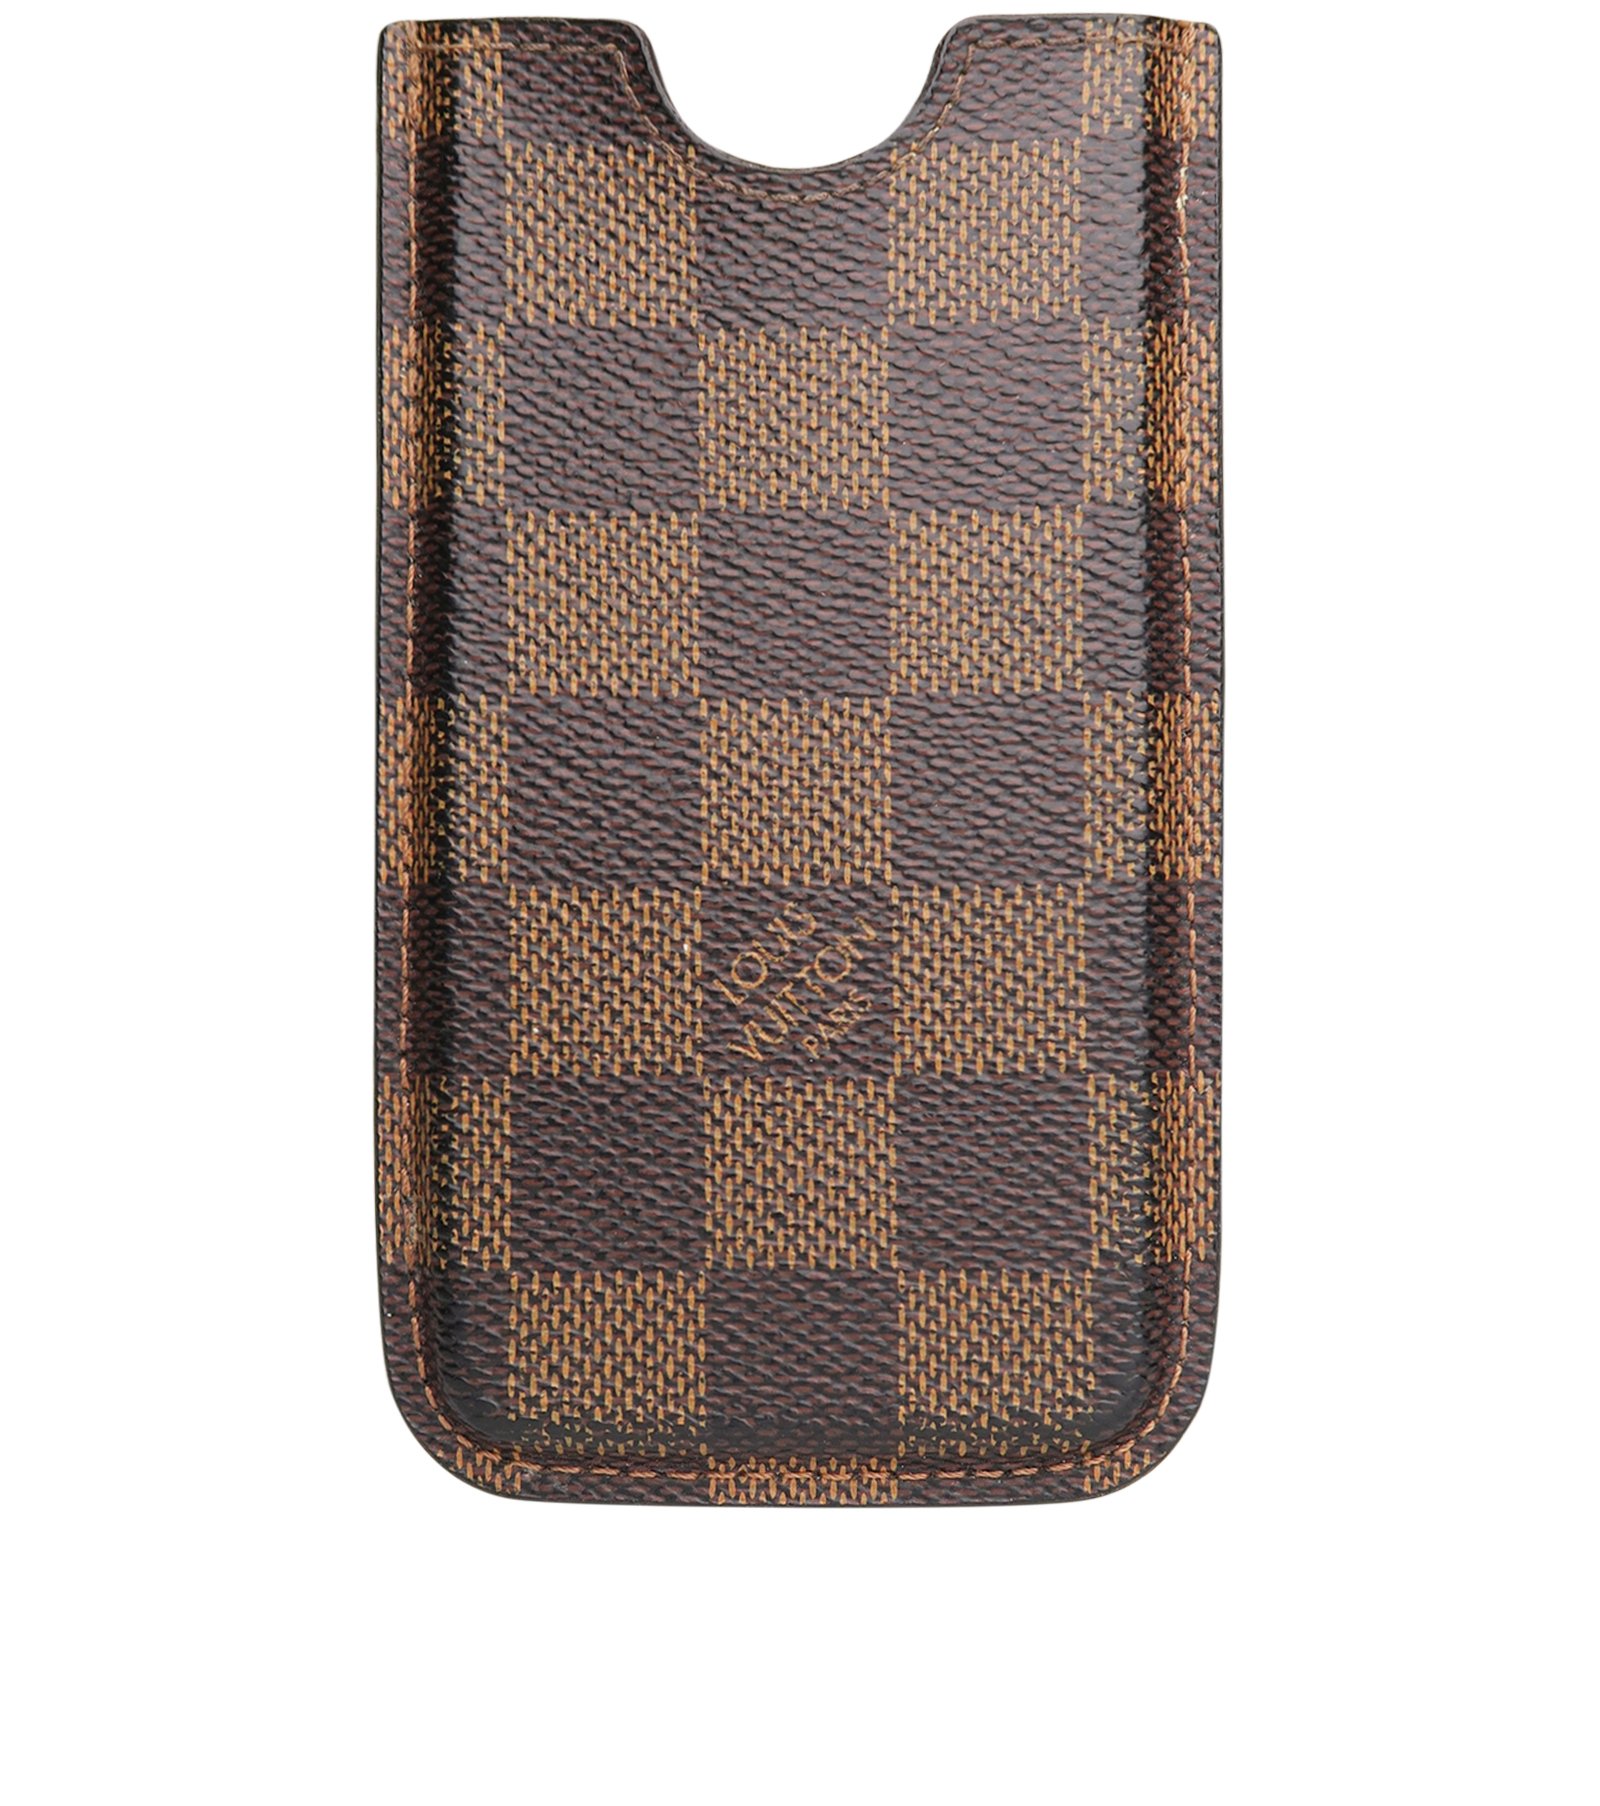 Louis Vuitton Damier Perforated Leather iPhone 5 Mobile Etui